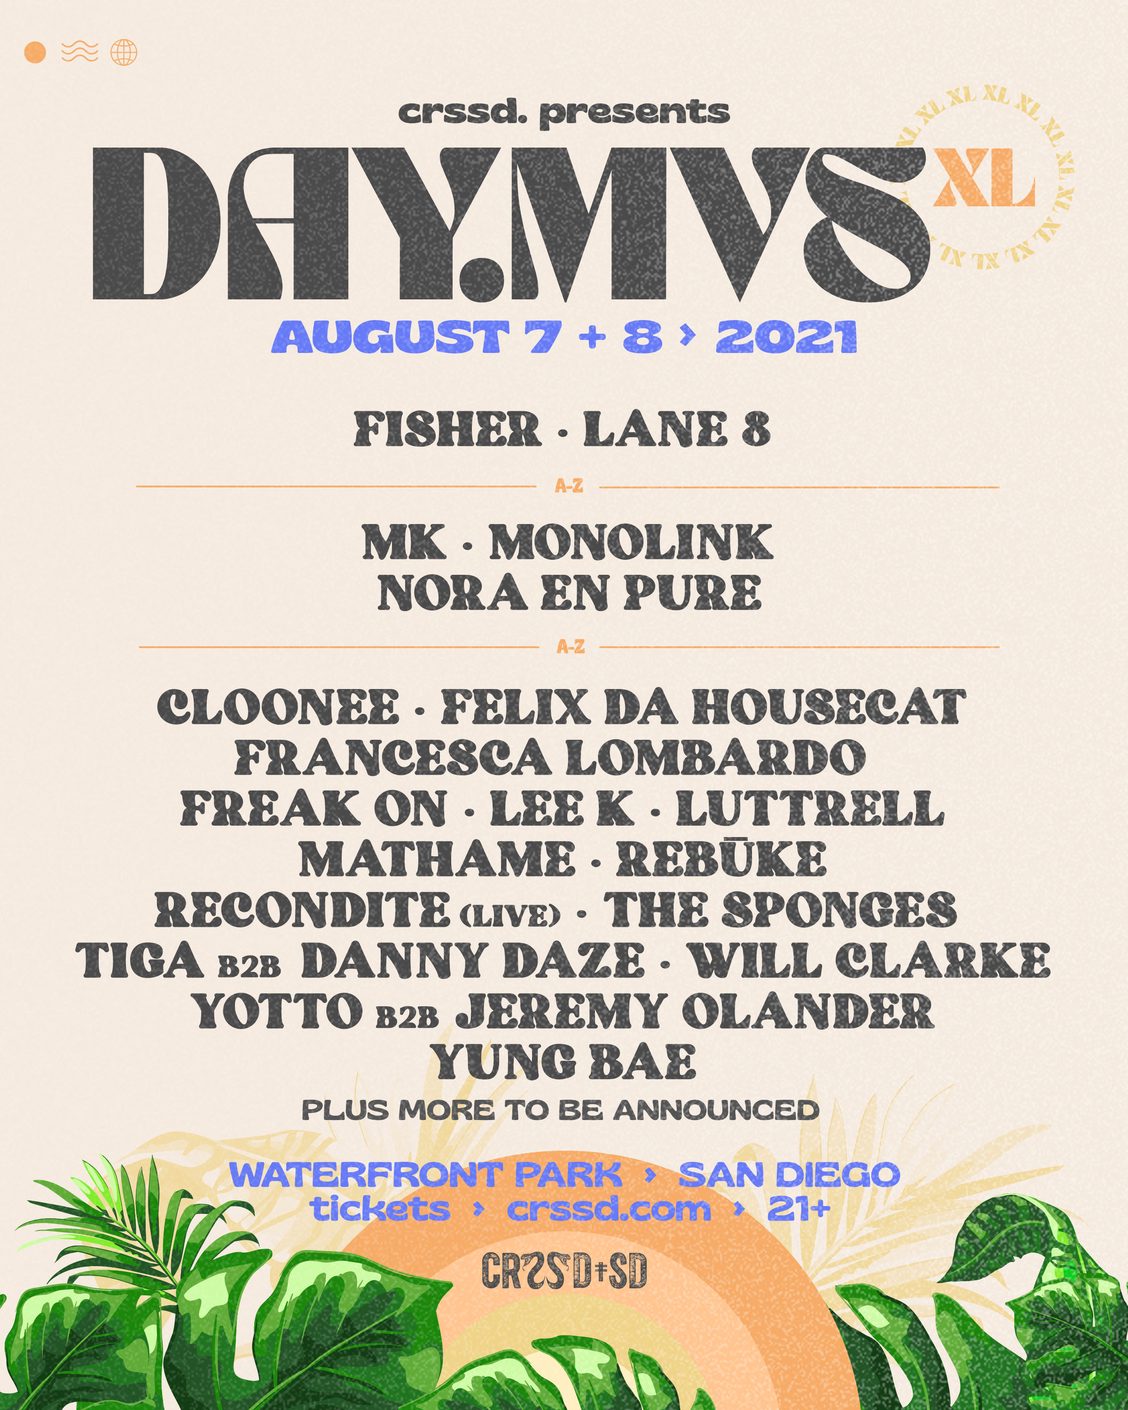 CRSSD Presents DAY.MVS XL Festival at San Diego’s Waterfront Park with FISHER, Lane 8, MK, and more